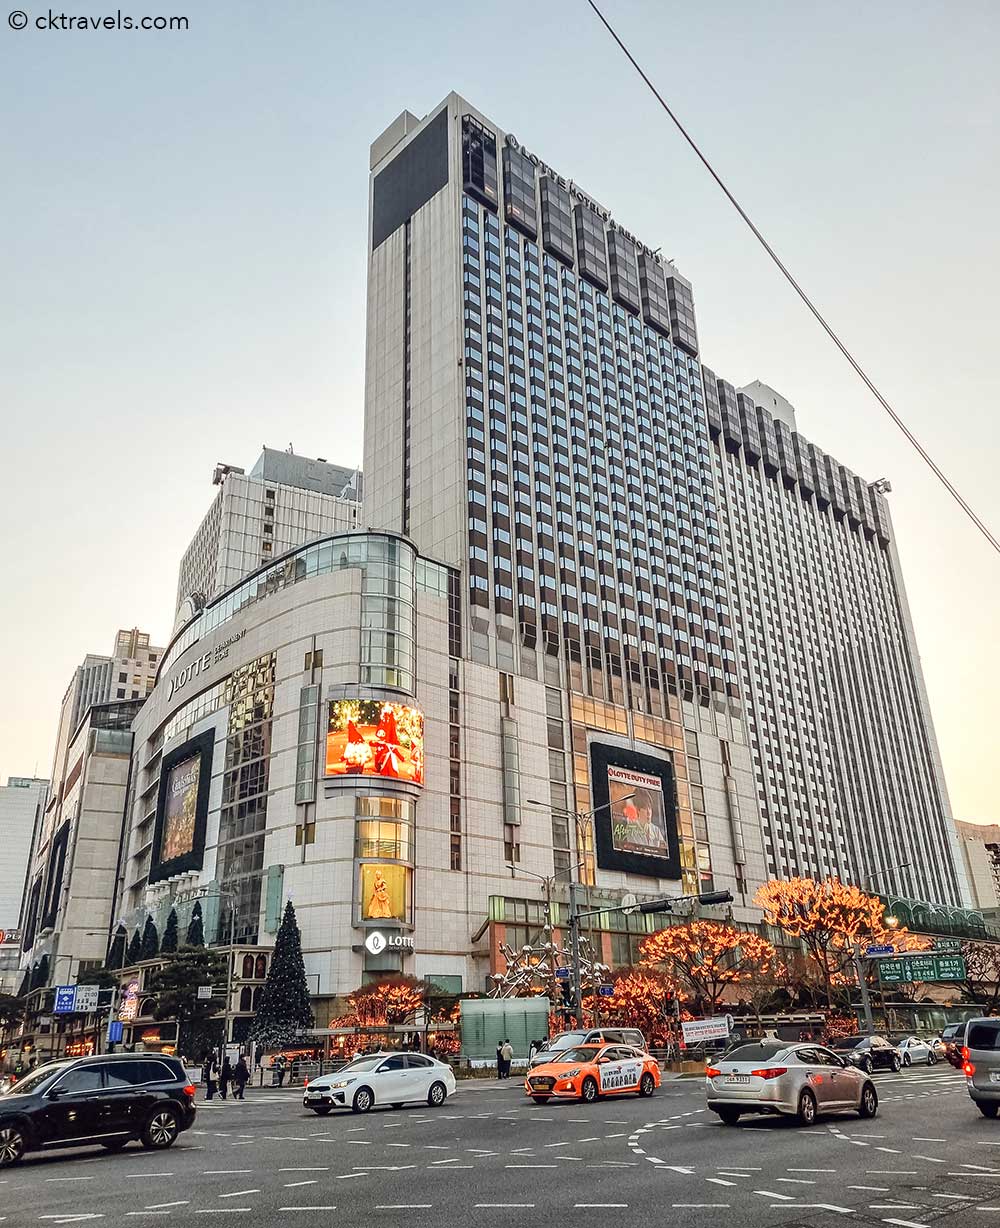 shopping malls and shopping centres in Seoul